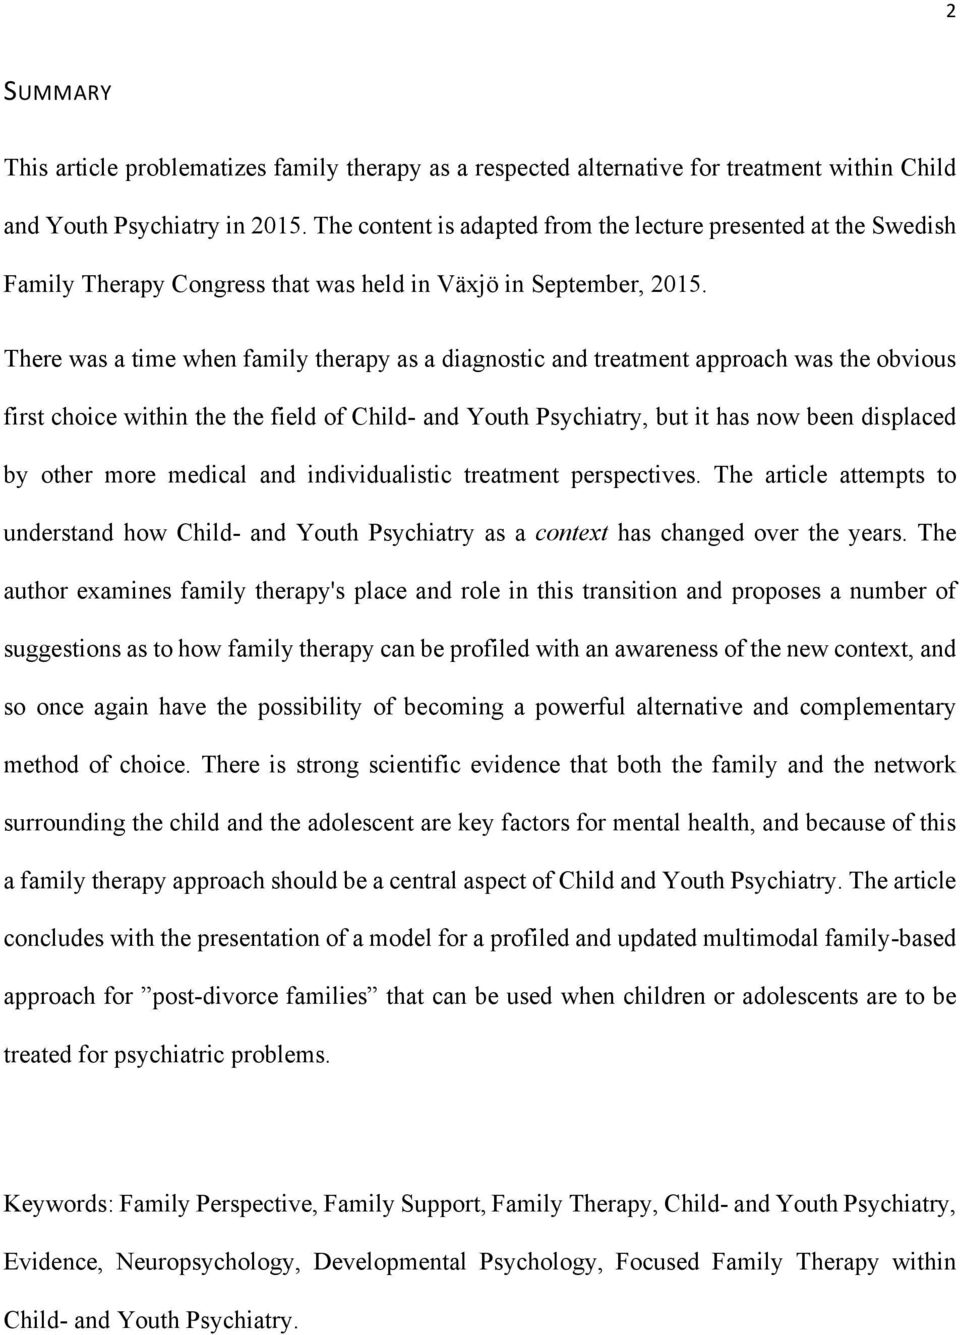 There was a time when family therapy as a diagnostic and treatment approach was the obvious first choice within the the field of Child- and Youth Psychiatry, but it has now been displaced by other